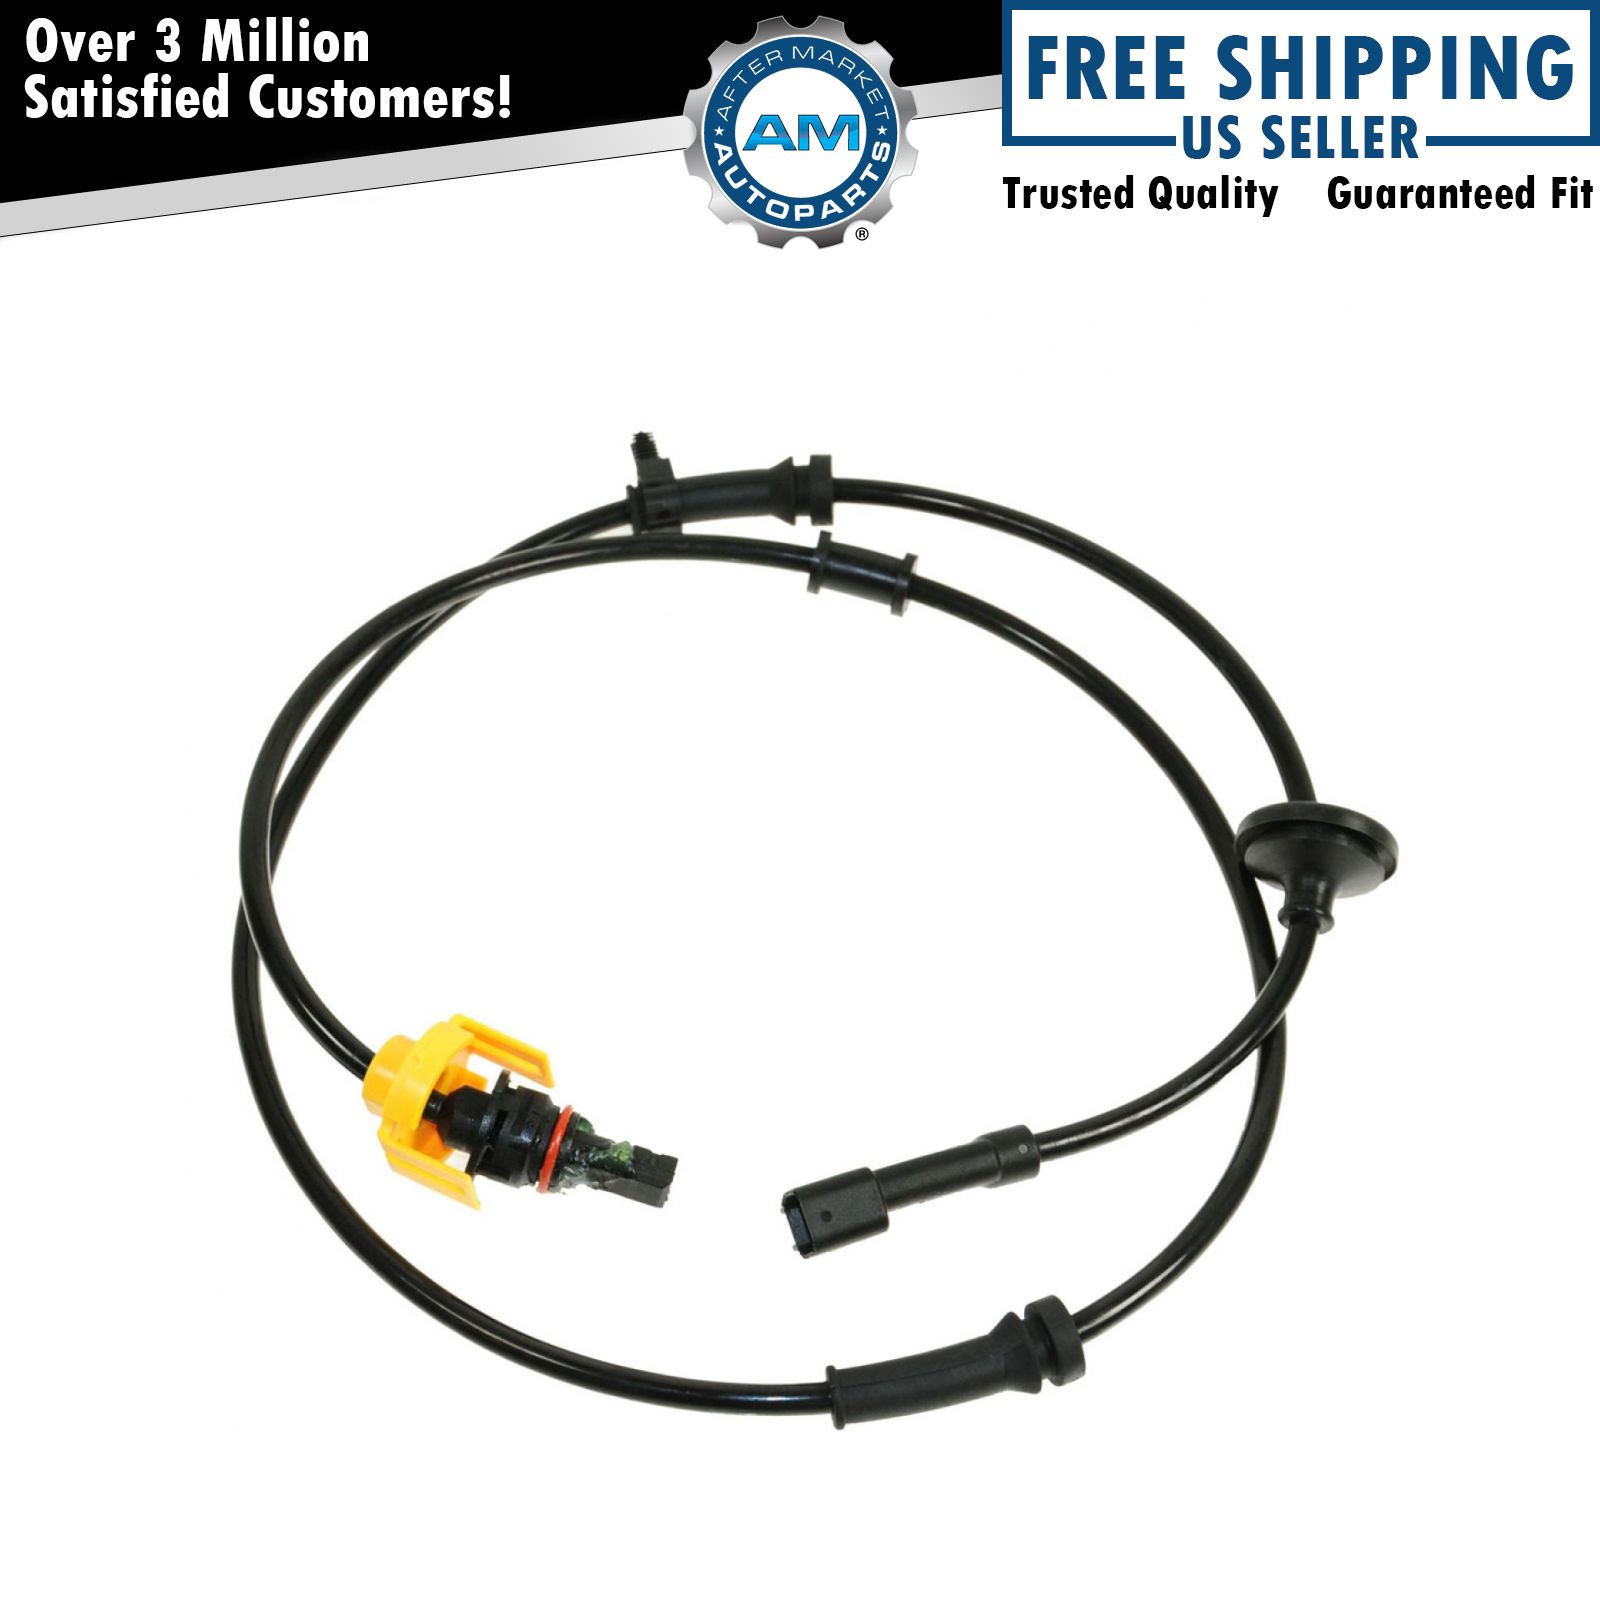 ABS Sensor and Harness LH or RH Rear for Town & Country Grand Caravan